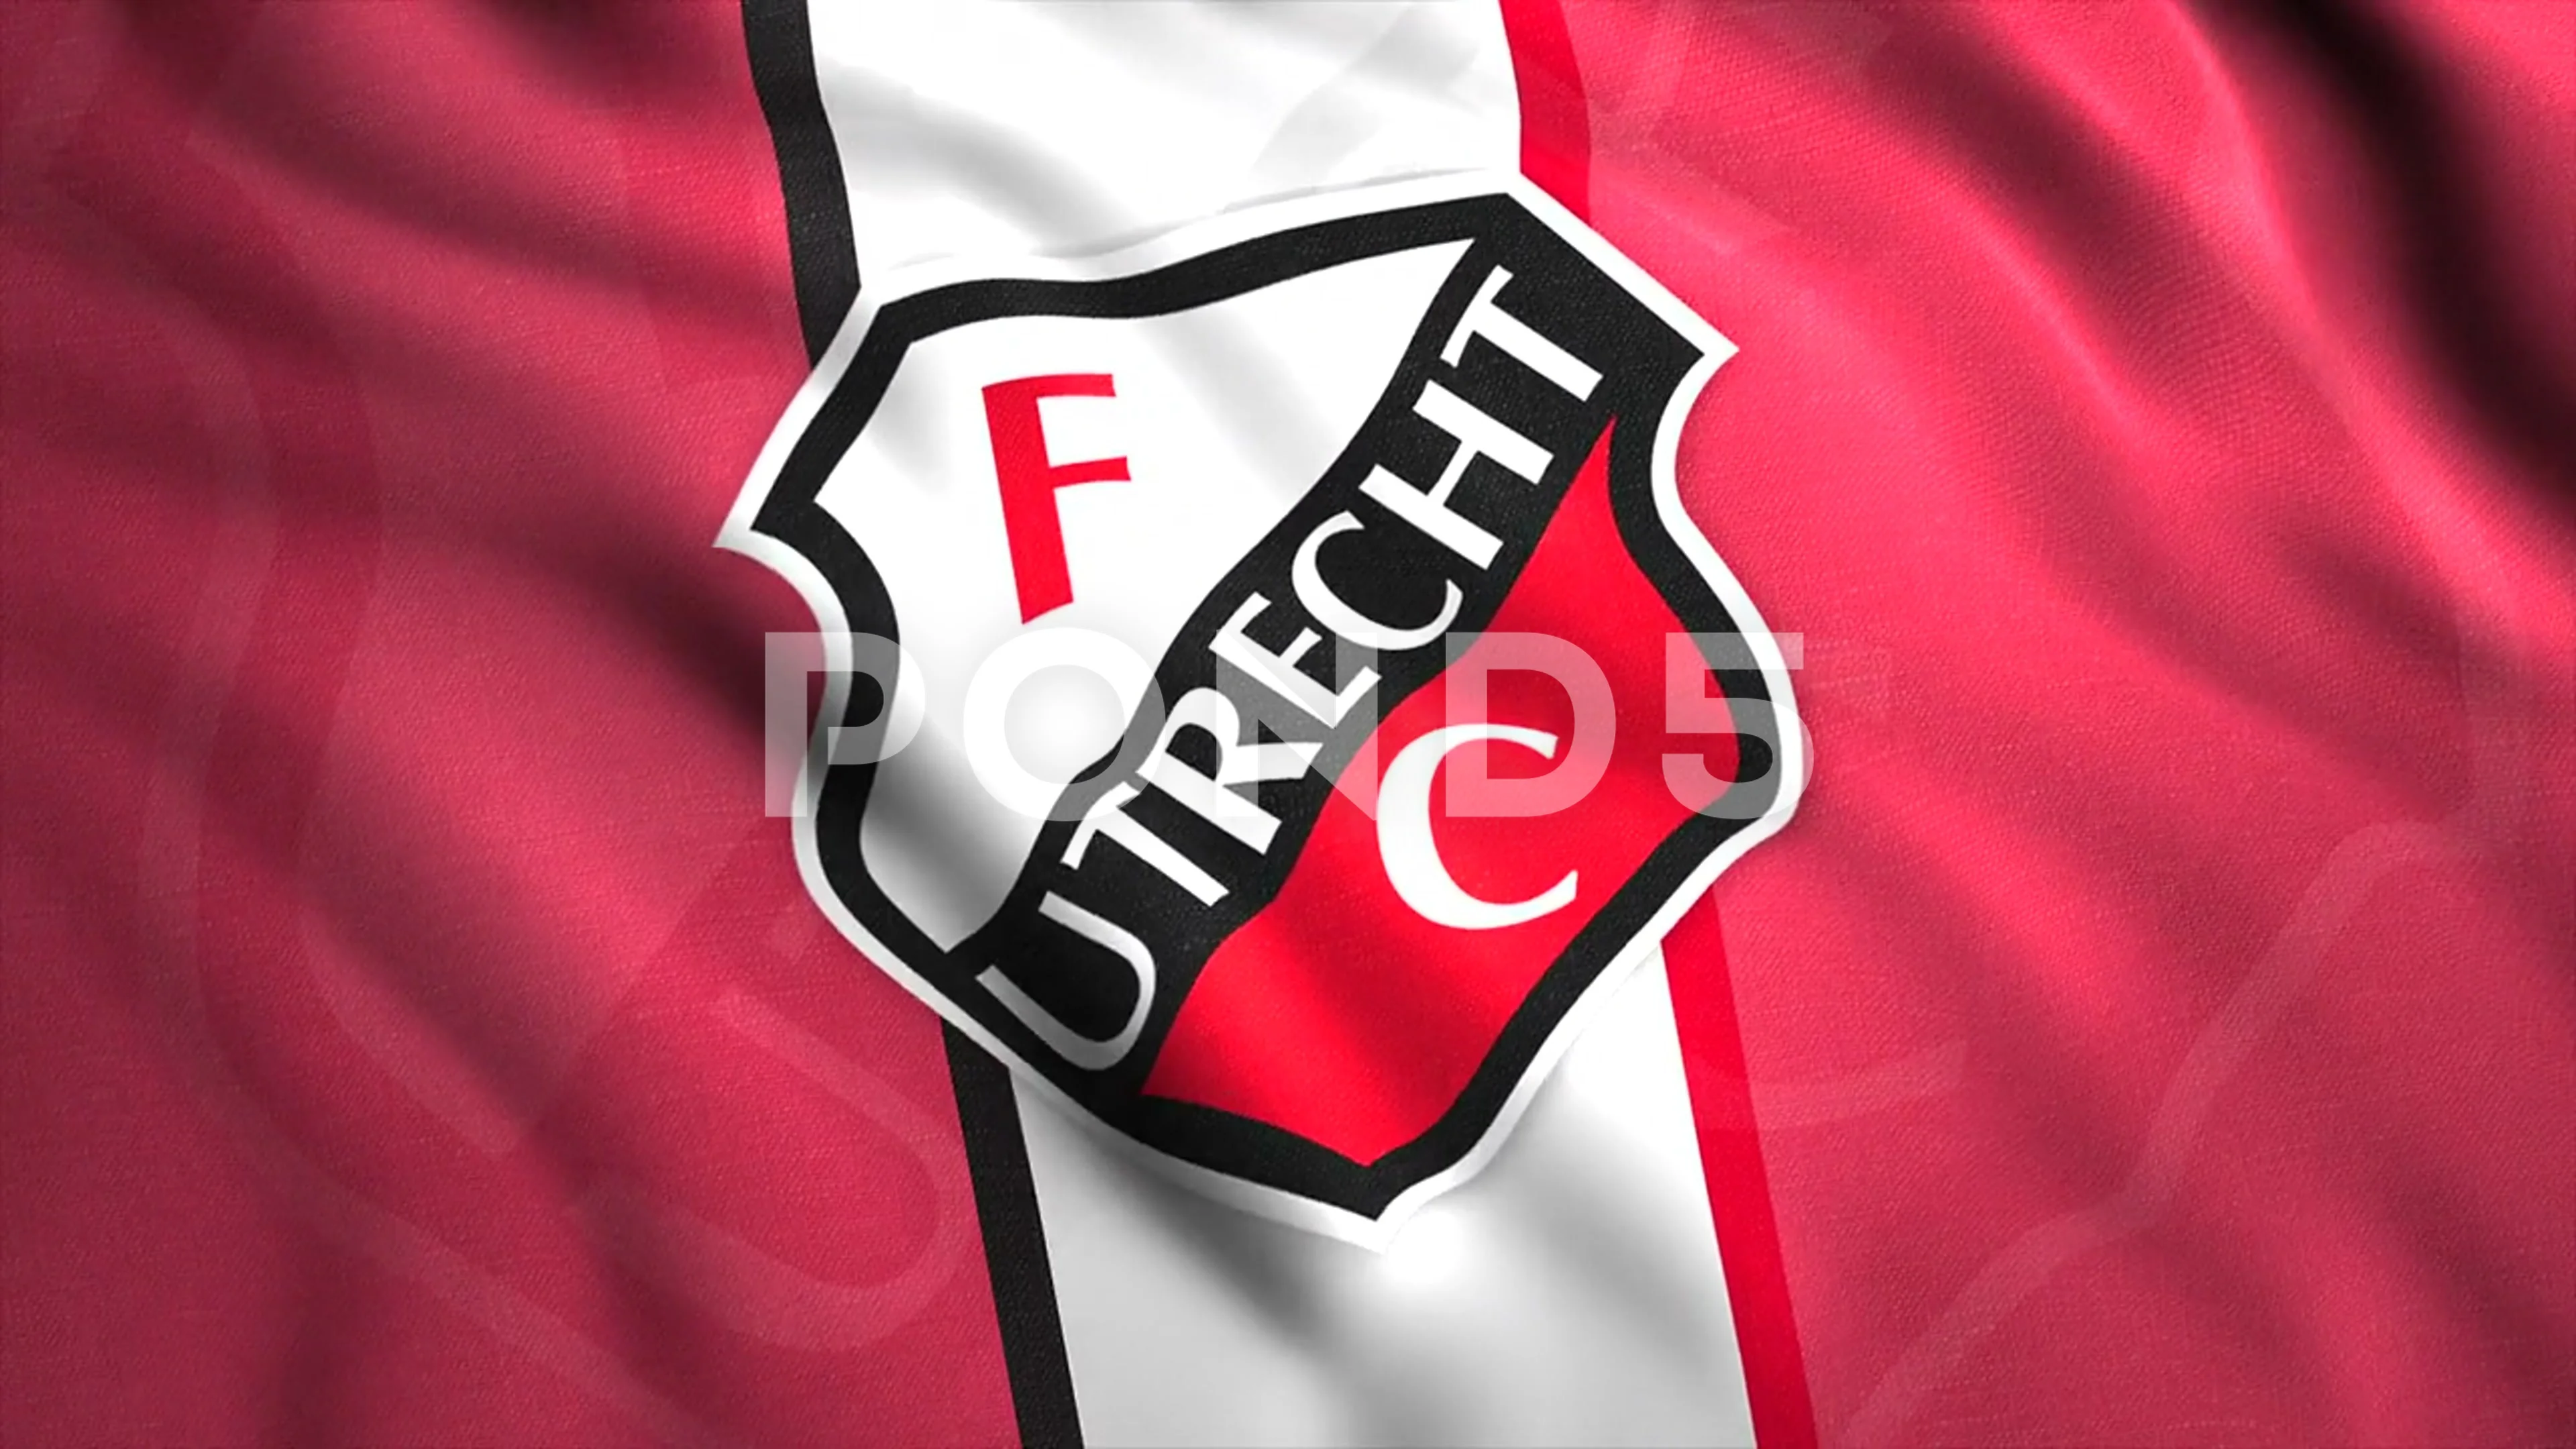 Waving Flag with Club Atletico Independiente Football Club Logo. 4K  Editorial Clip Stock Video - Video of soccer, animation: 140258915